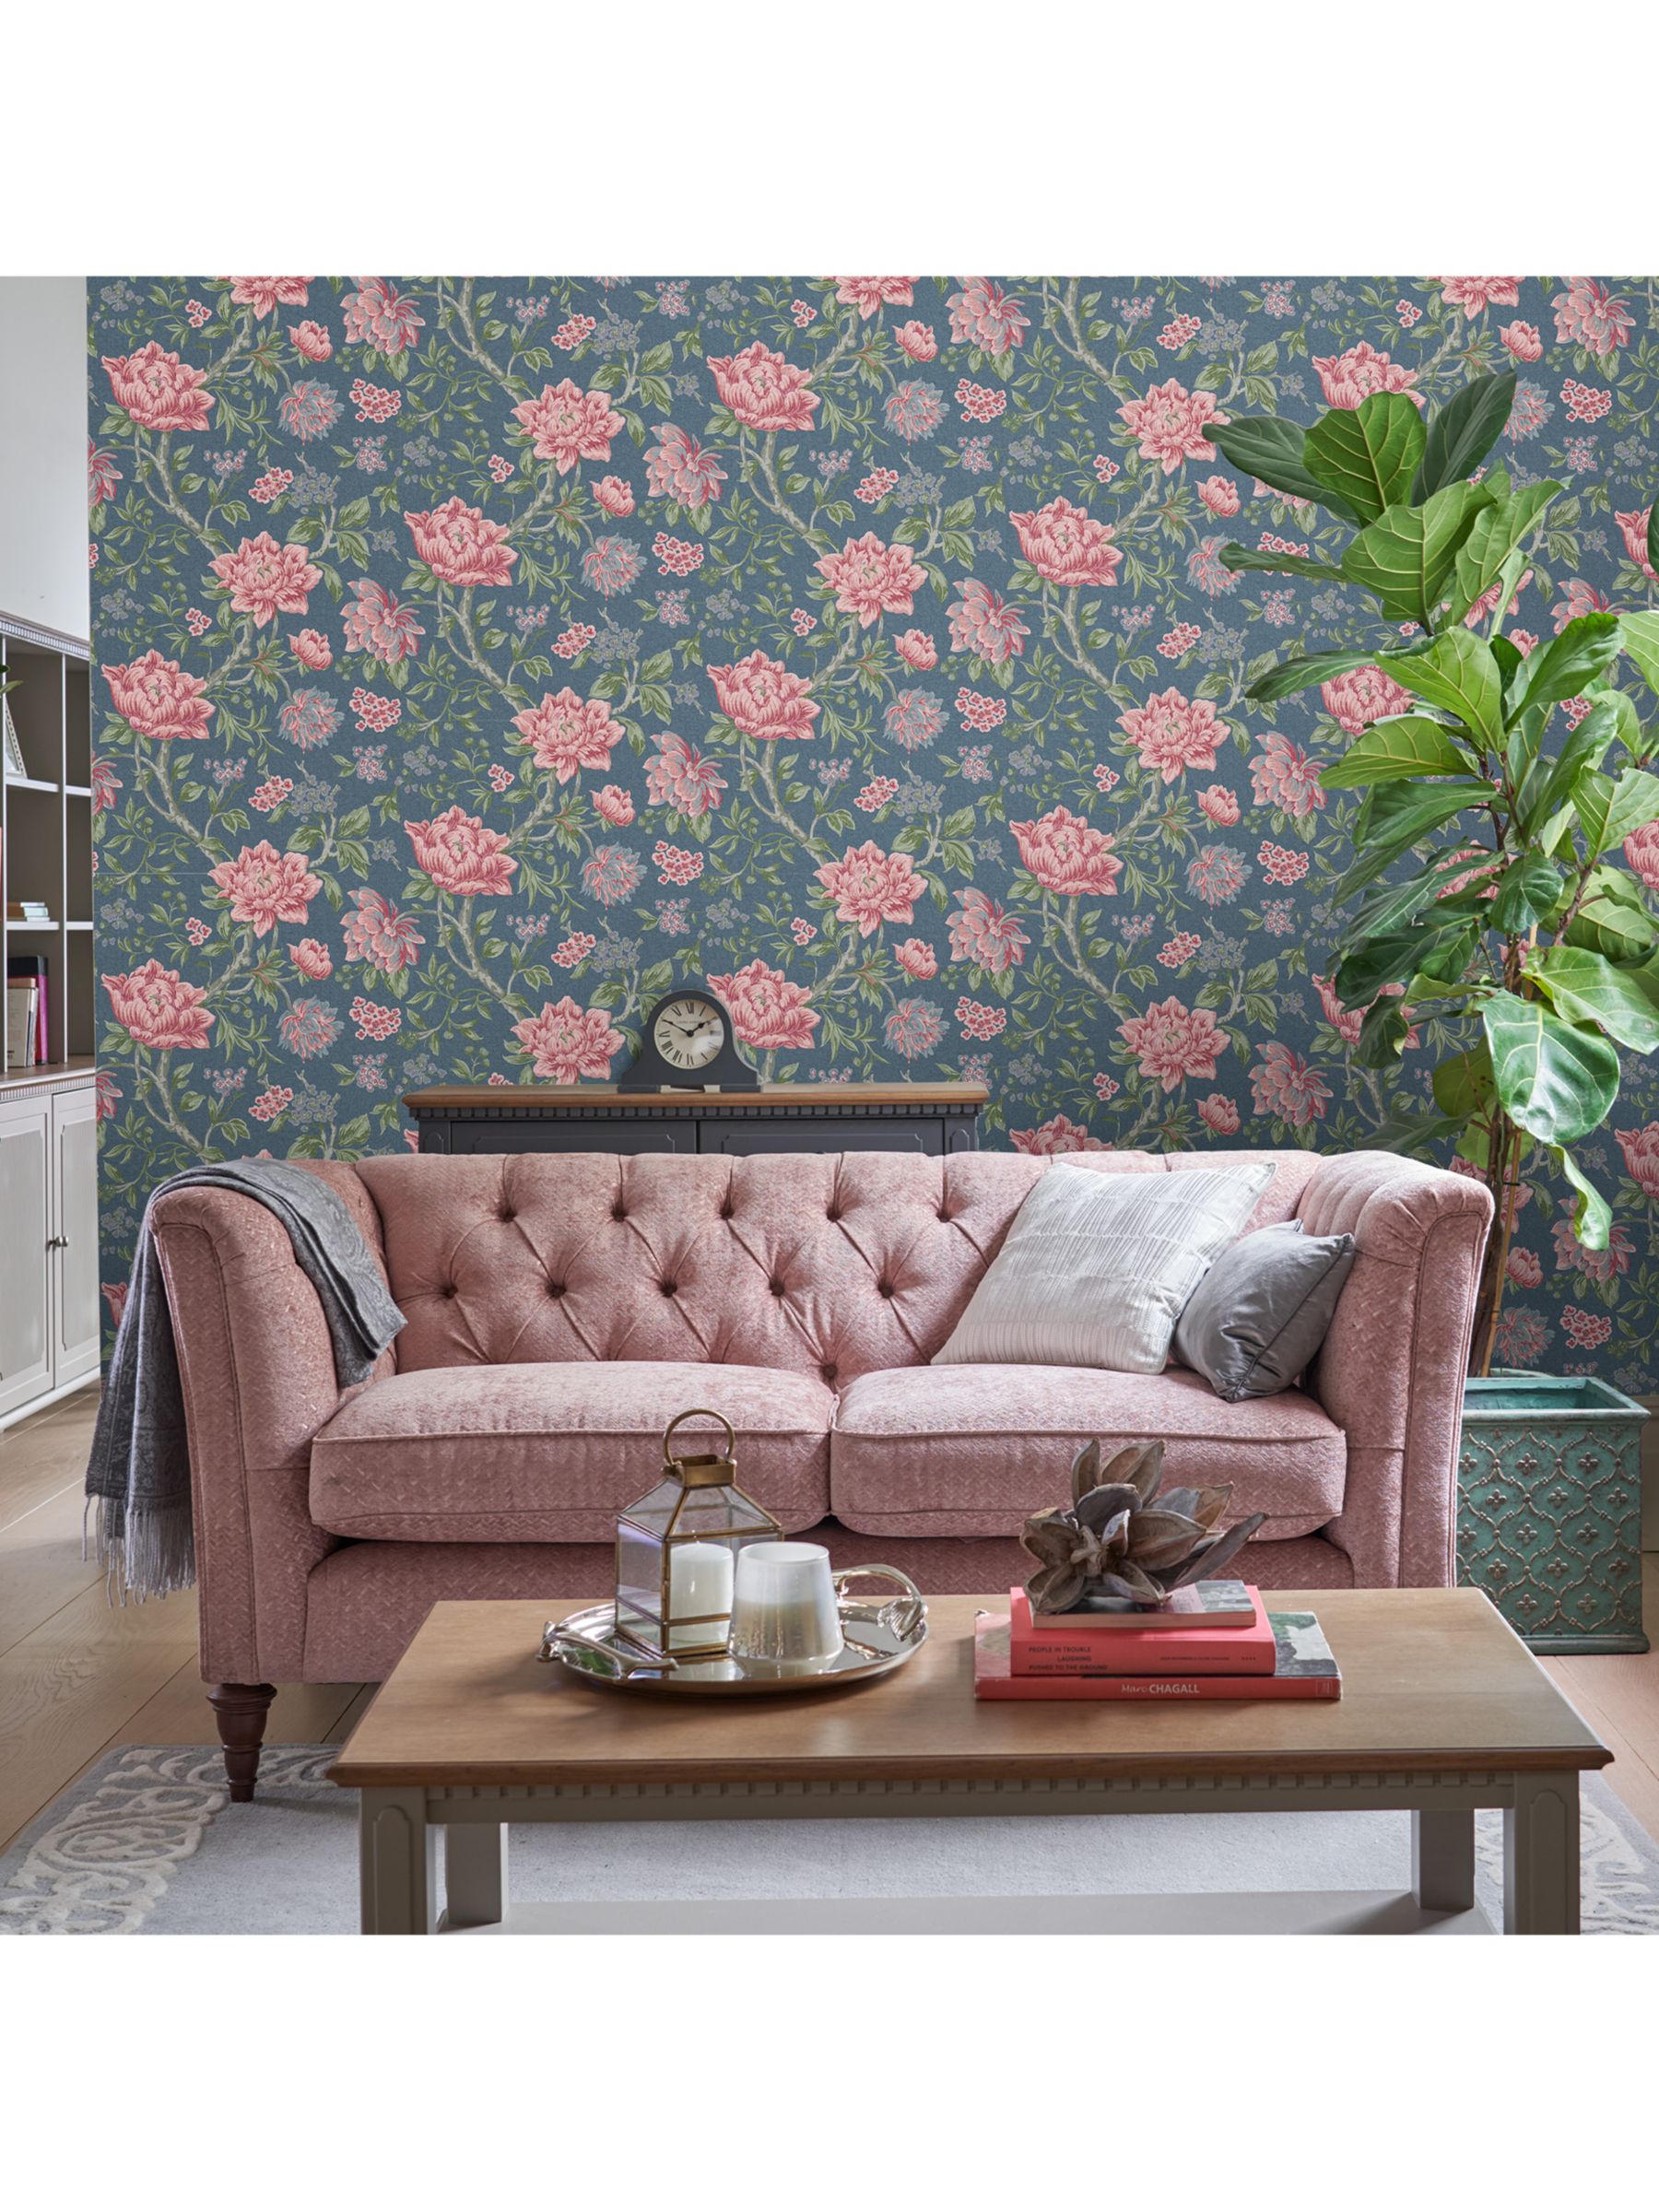 Laura Ashley Tapestry Floral Wallpaper